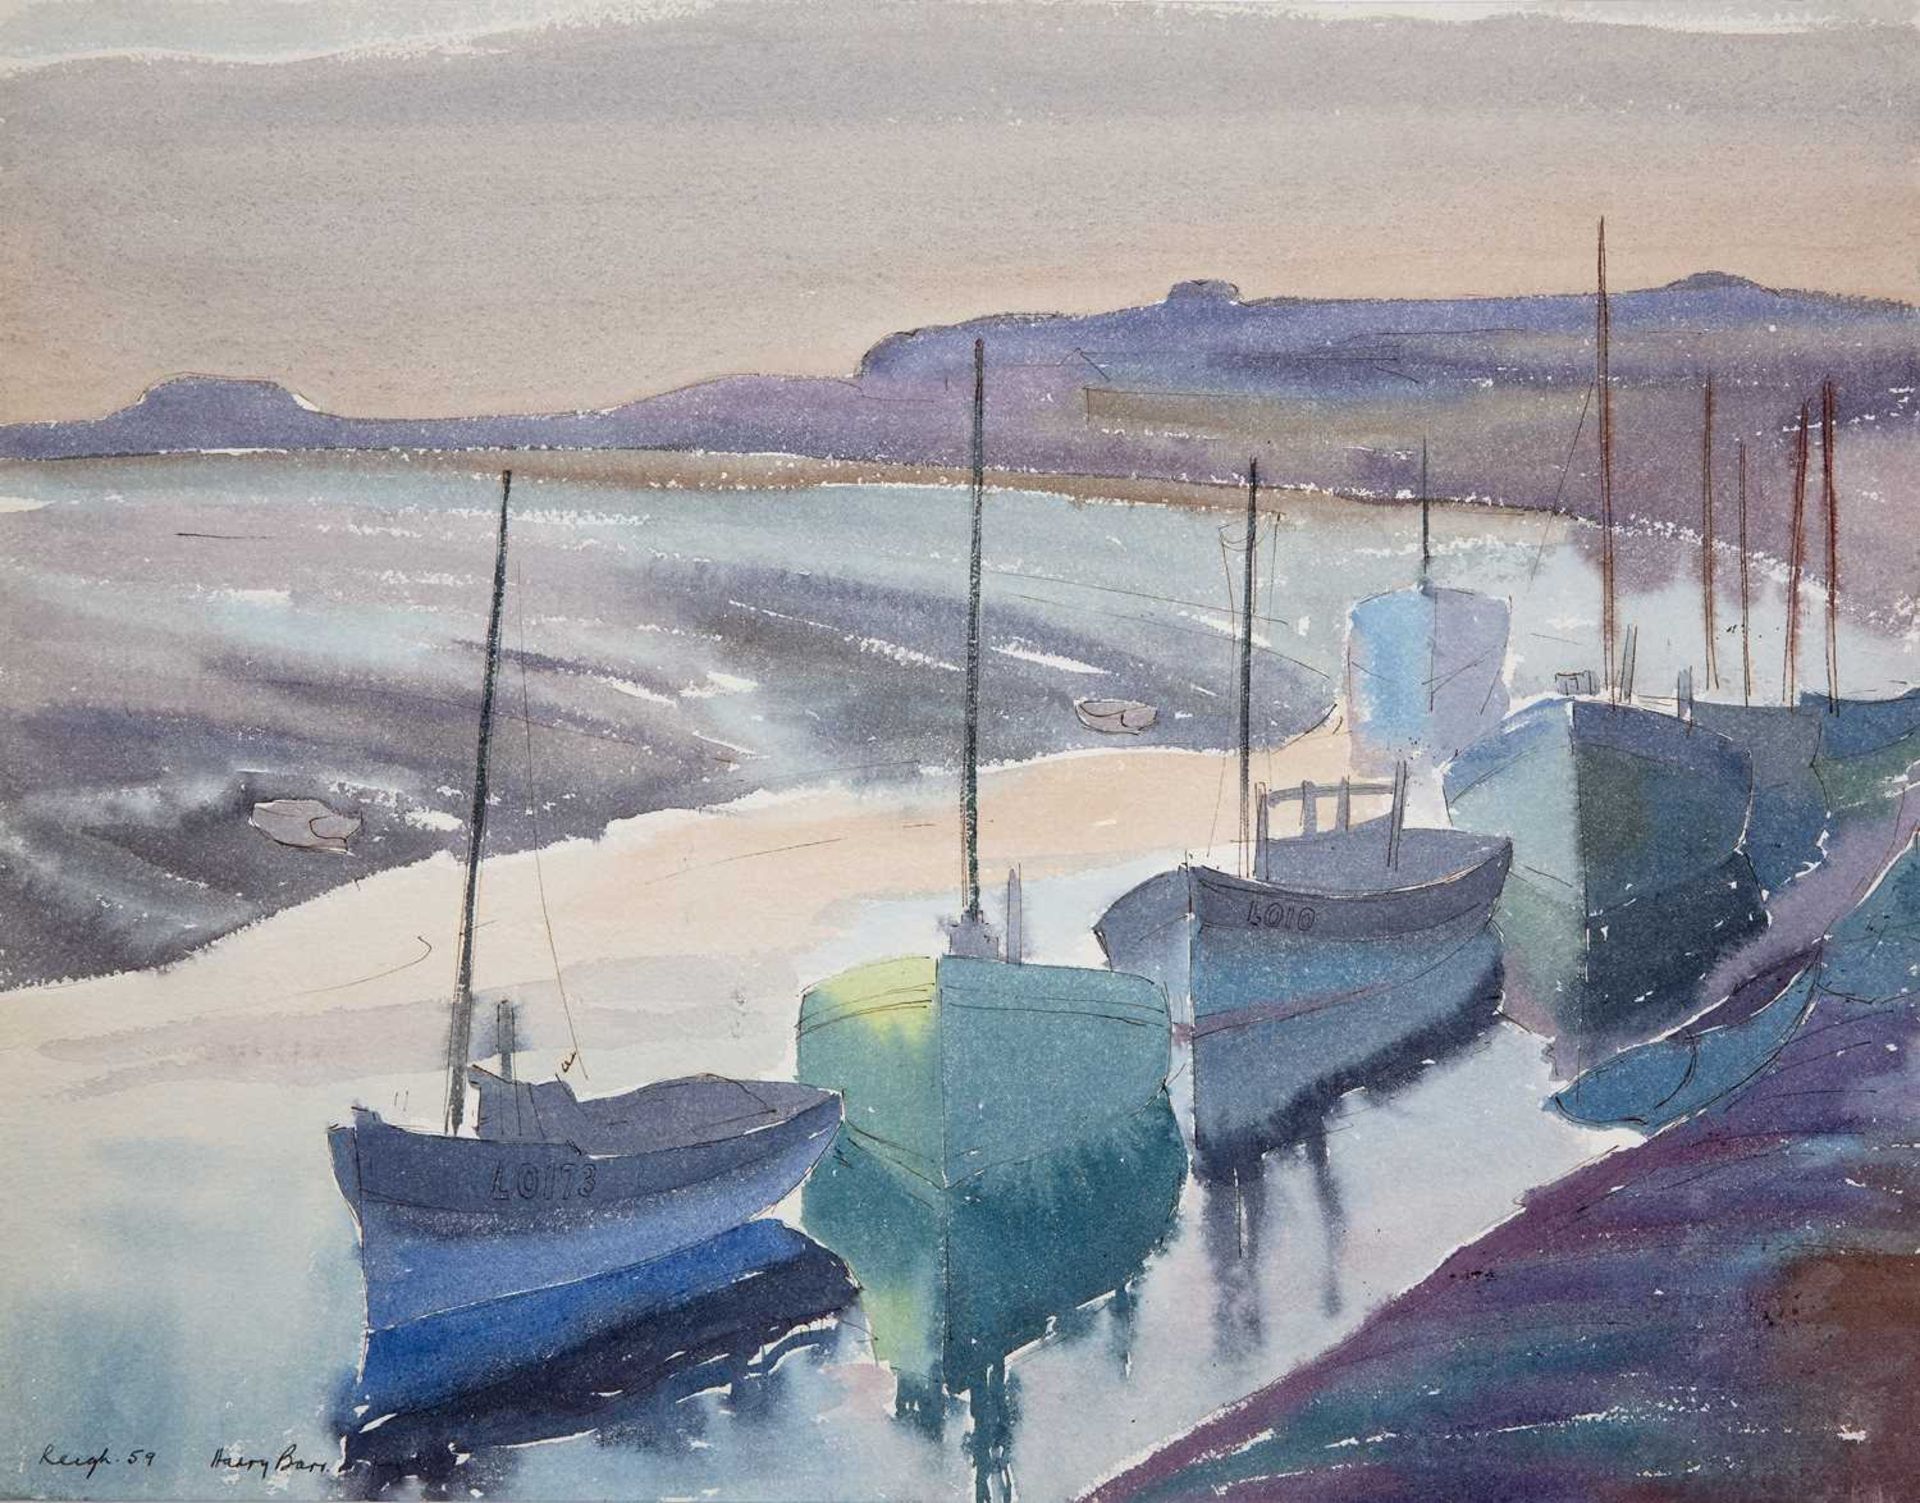 Harry Barr (1896-1987) Leigh, signed, dated 59 and inscribed with title, ink and watercolour, 36 x